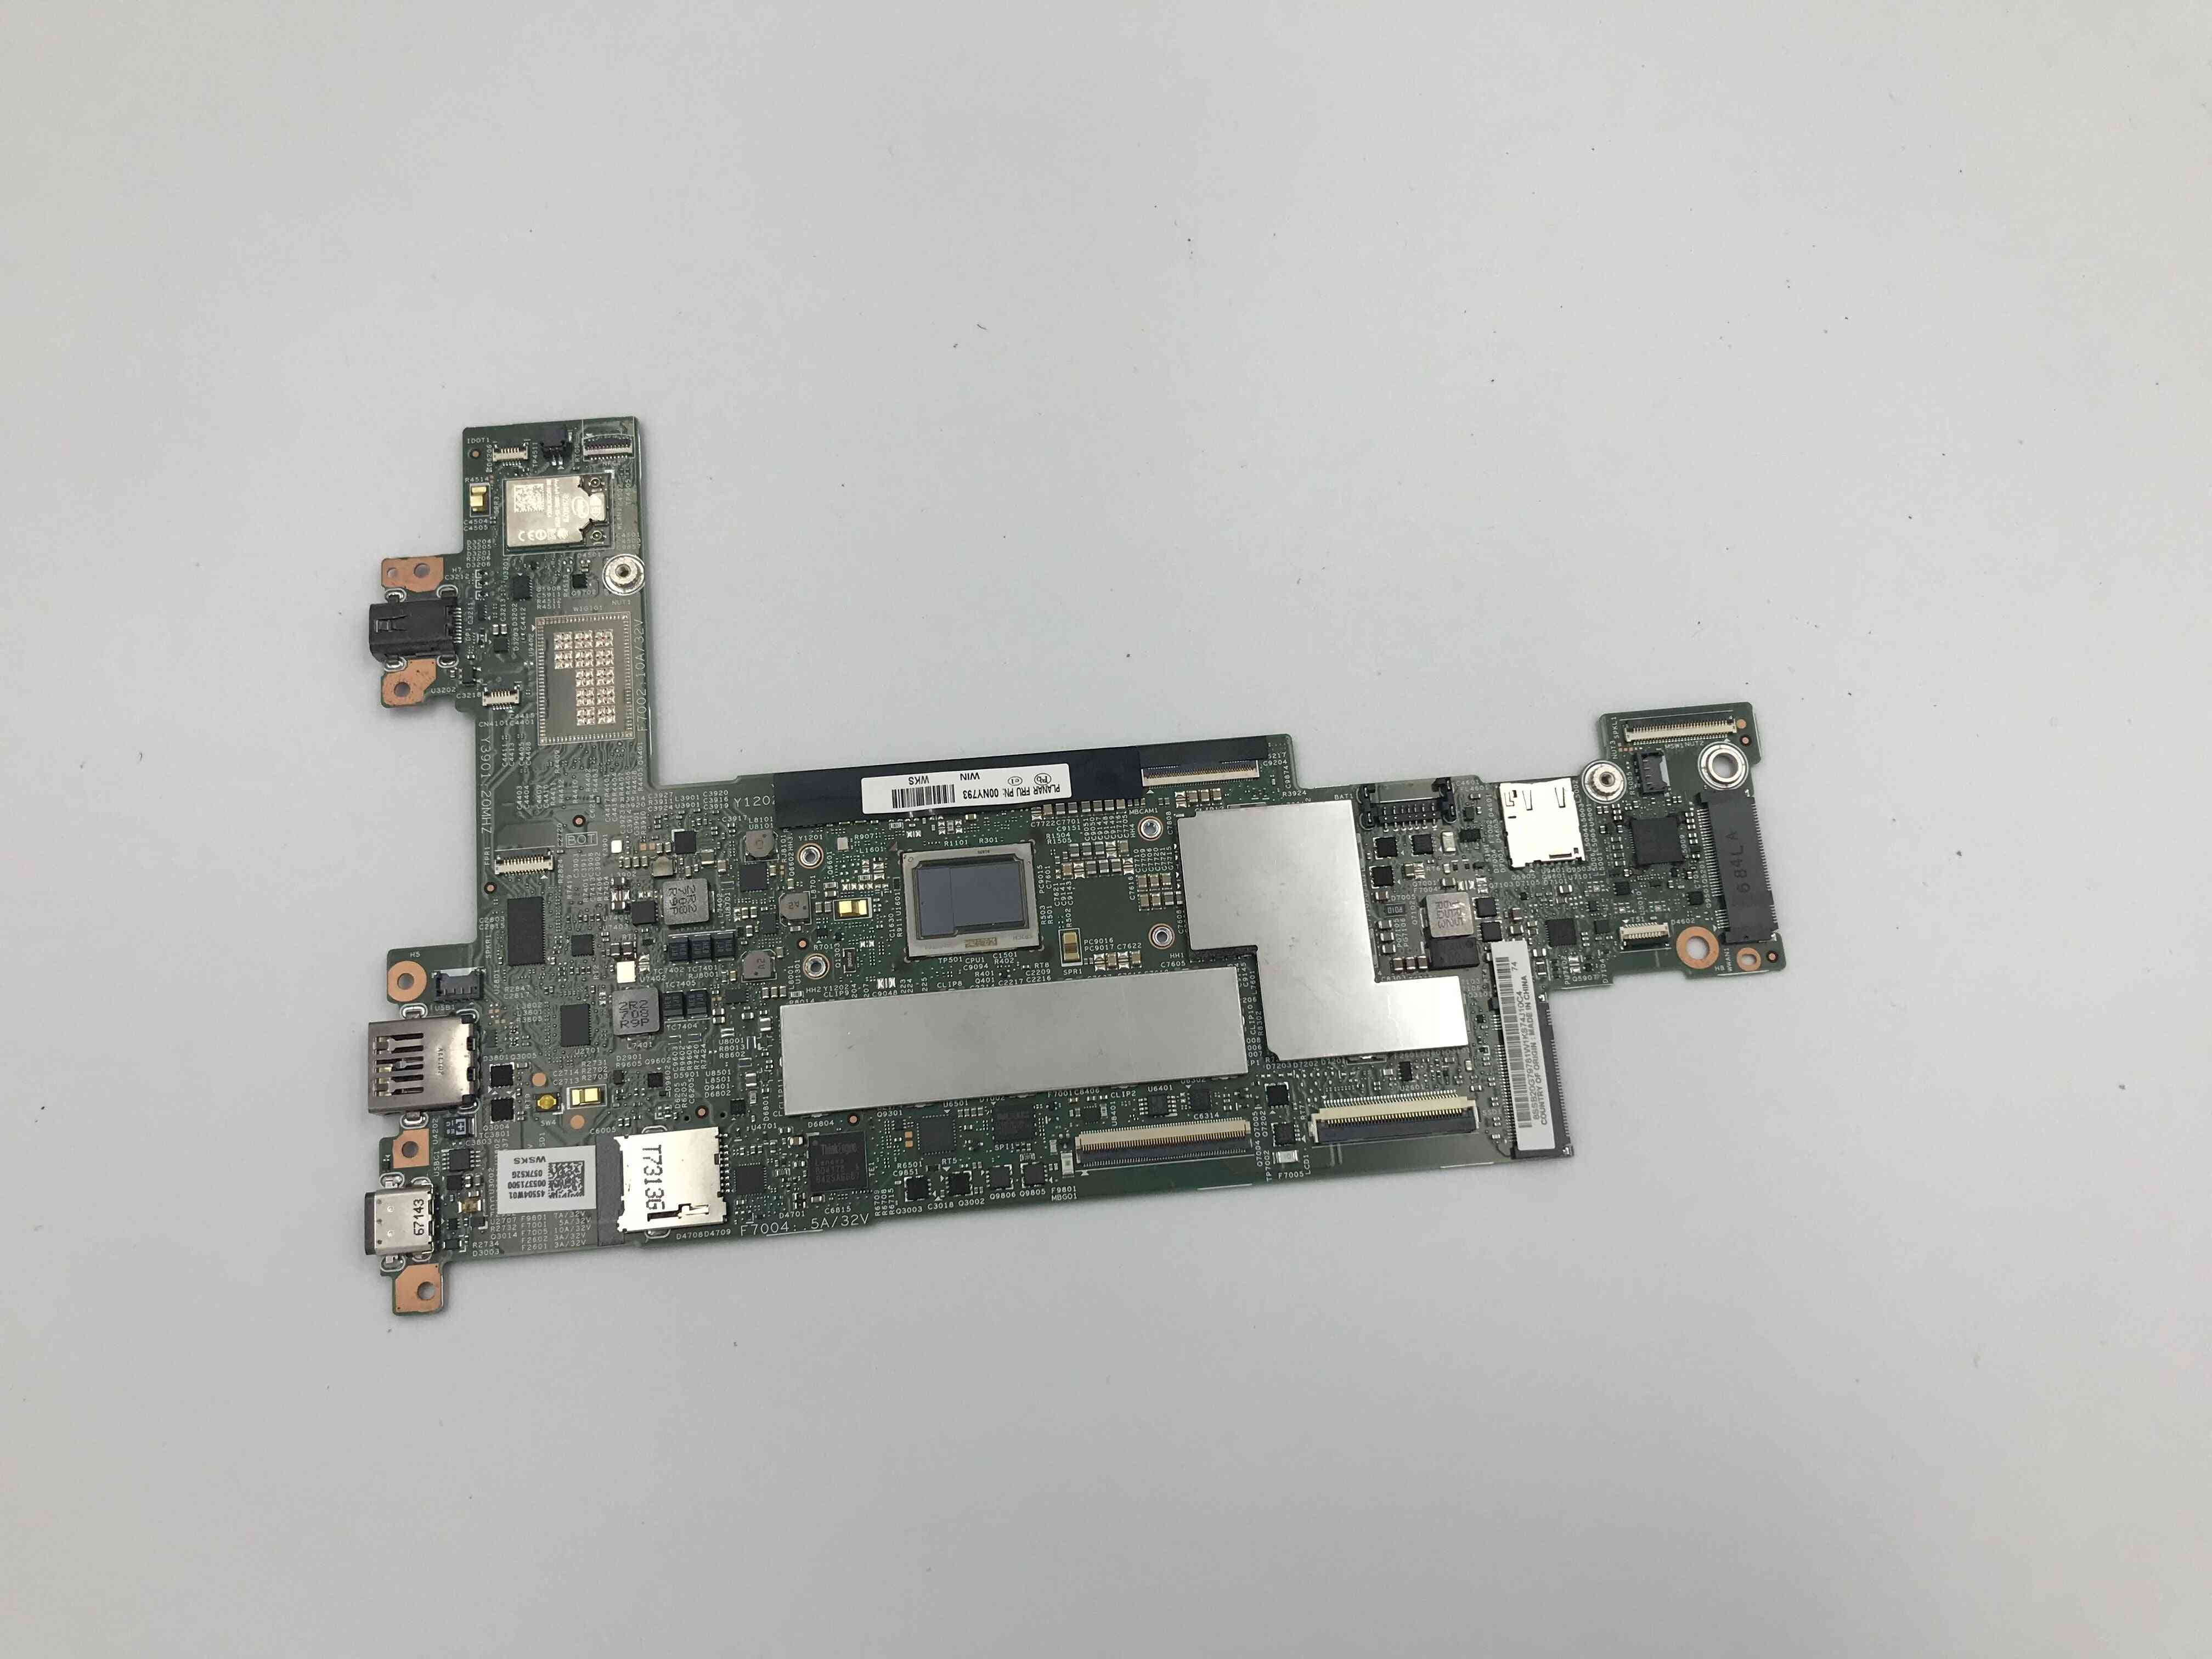 Laptop Motherboard With 6y75 Cpu And 8g Ram